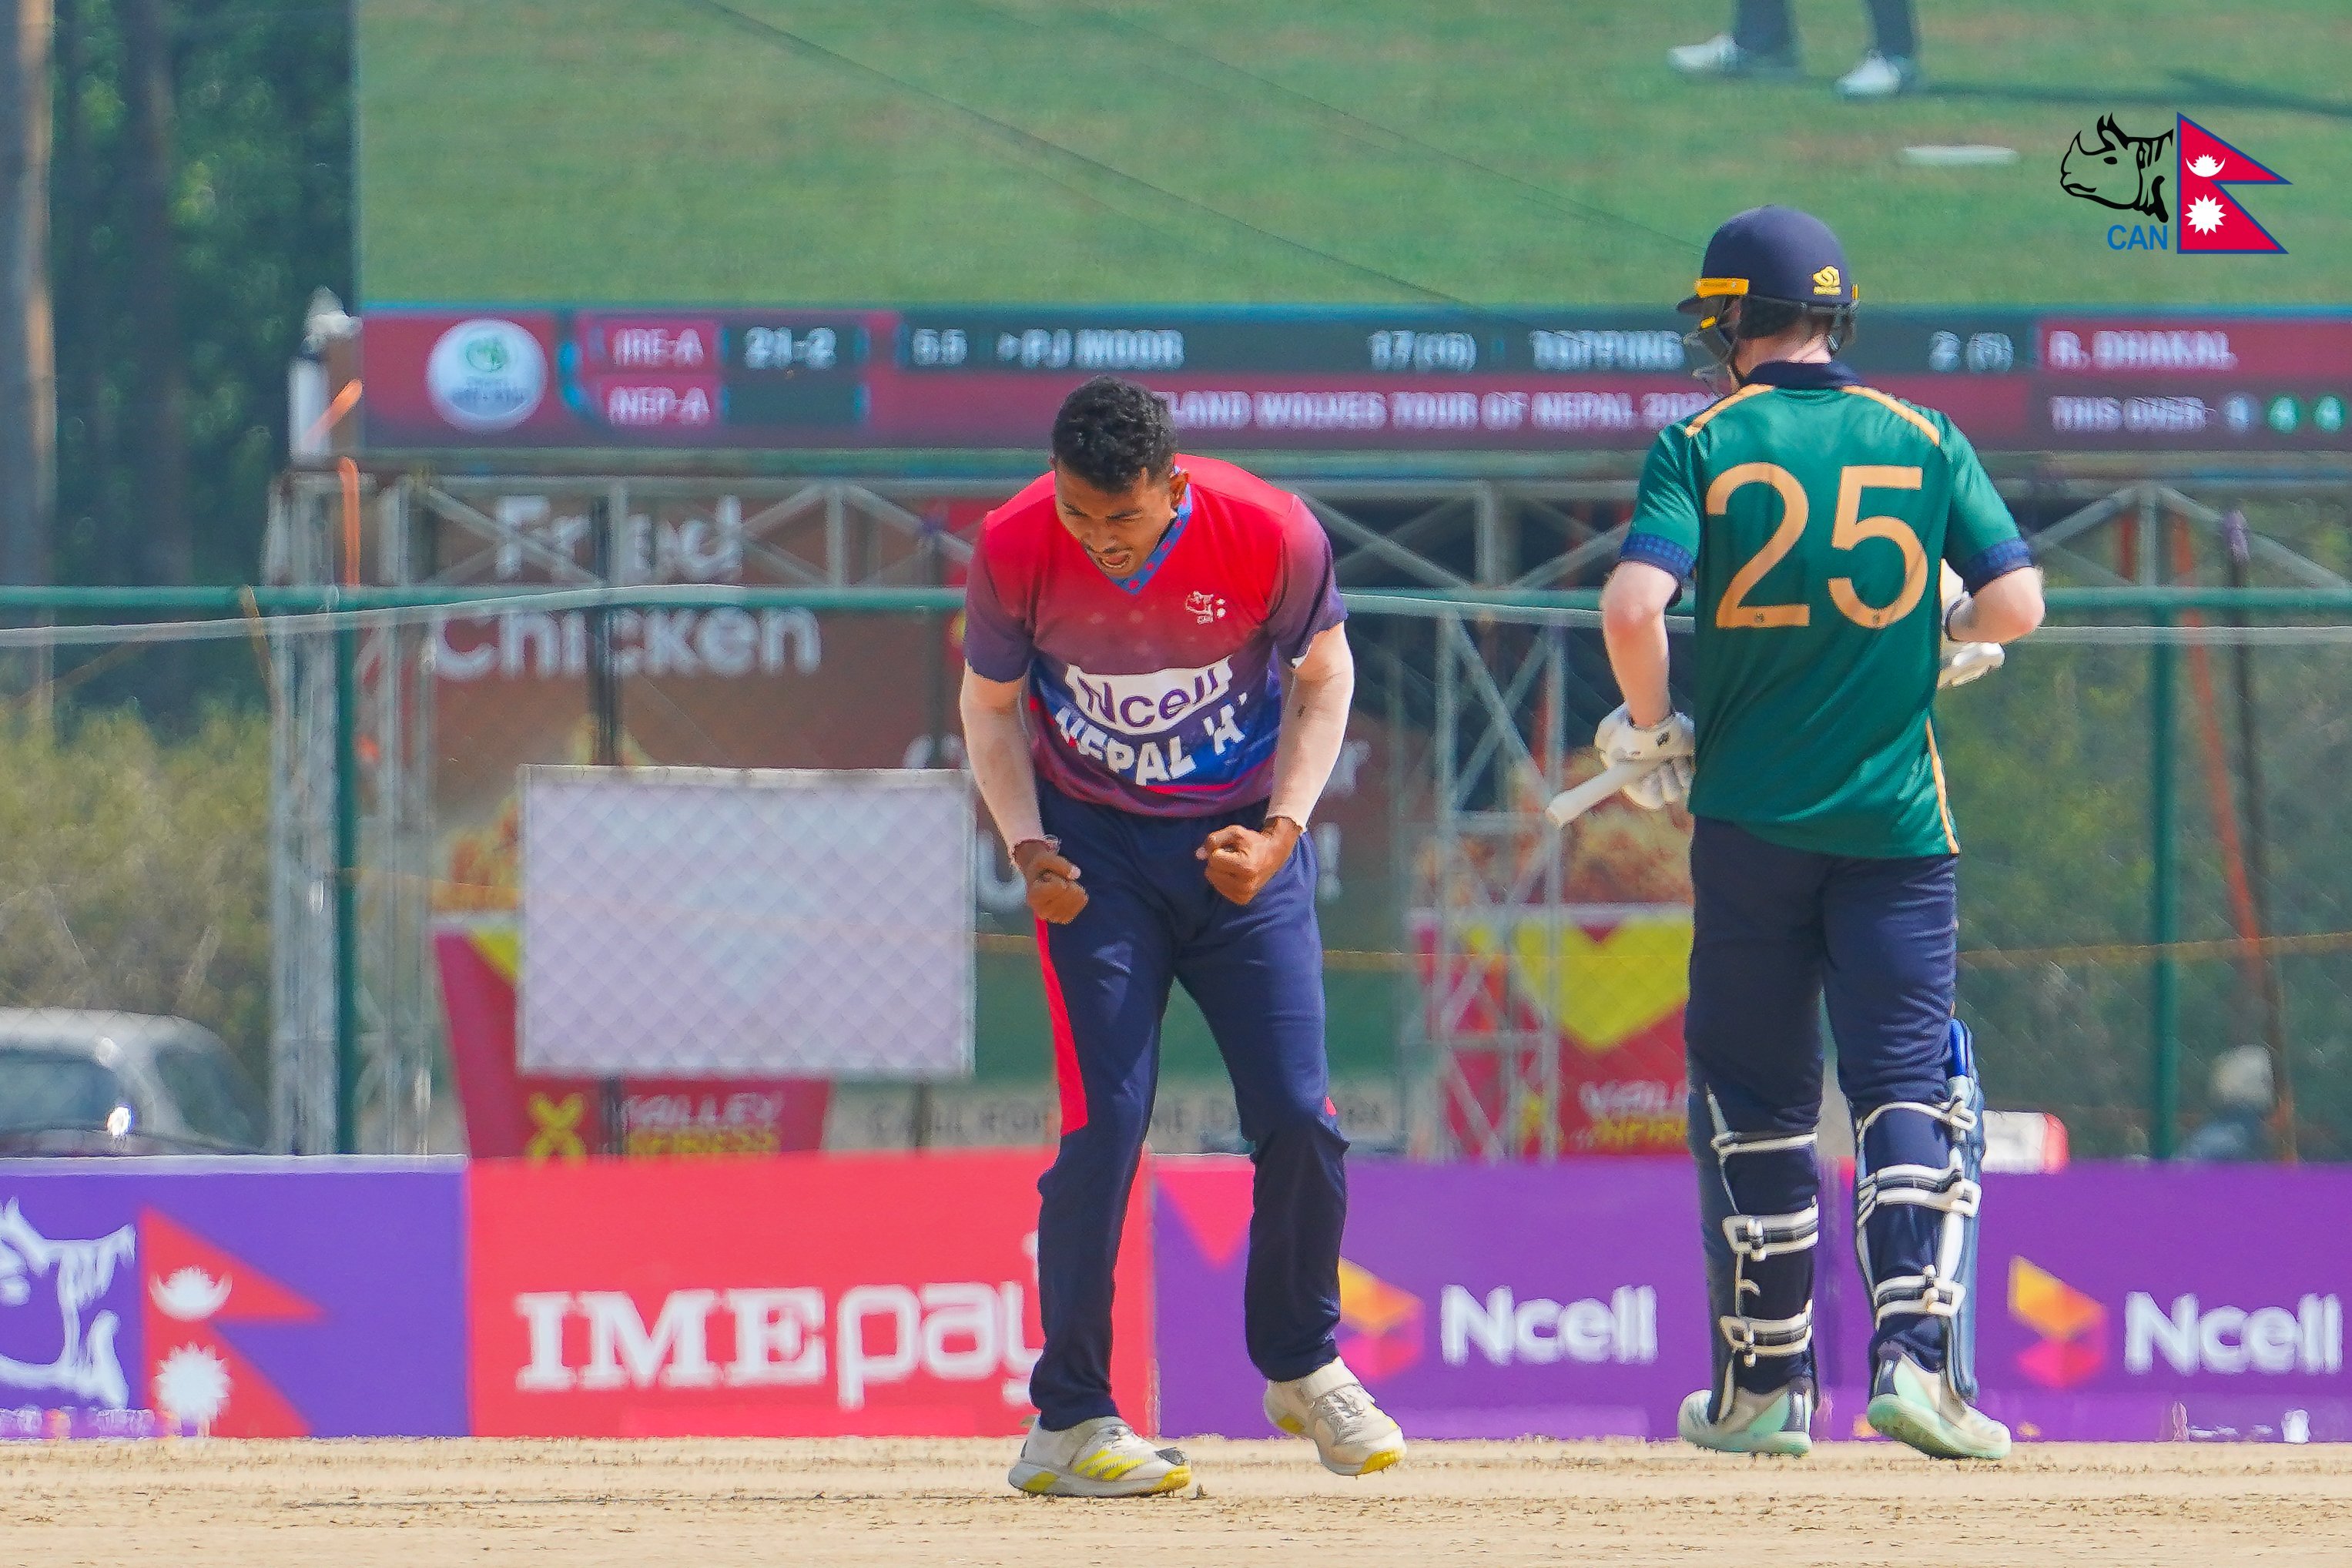 Nepal 'A' battles Ireland Wolves in ODI face-off